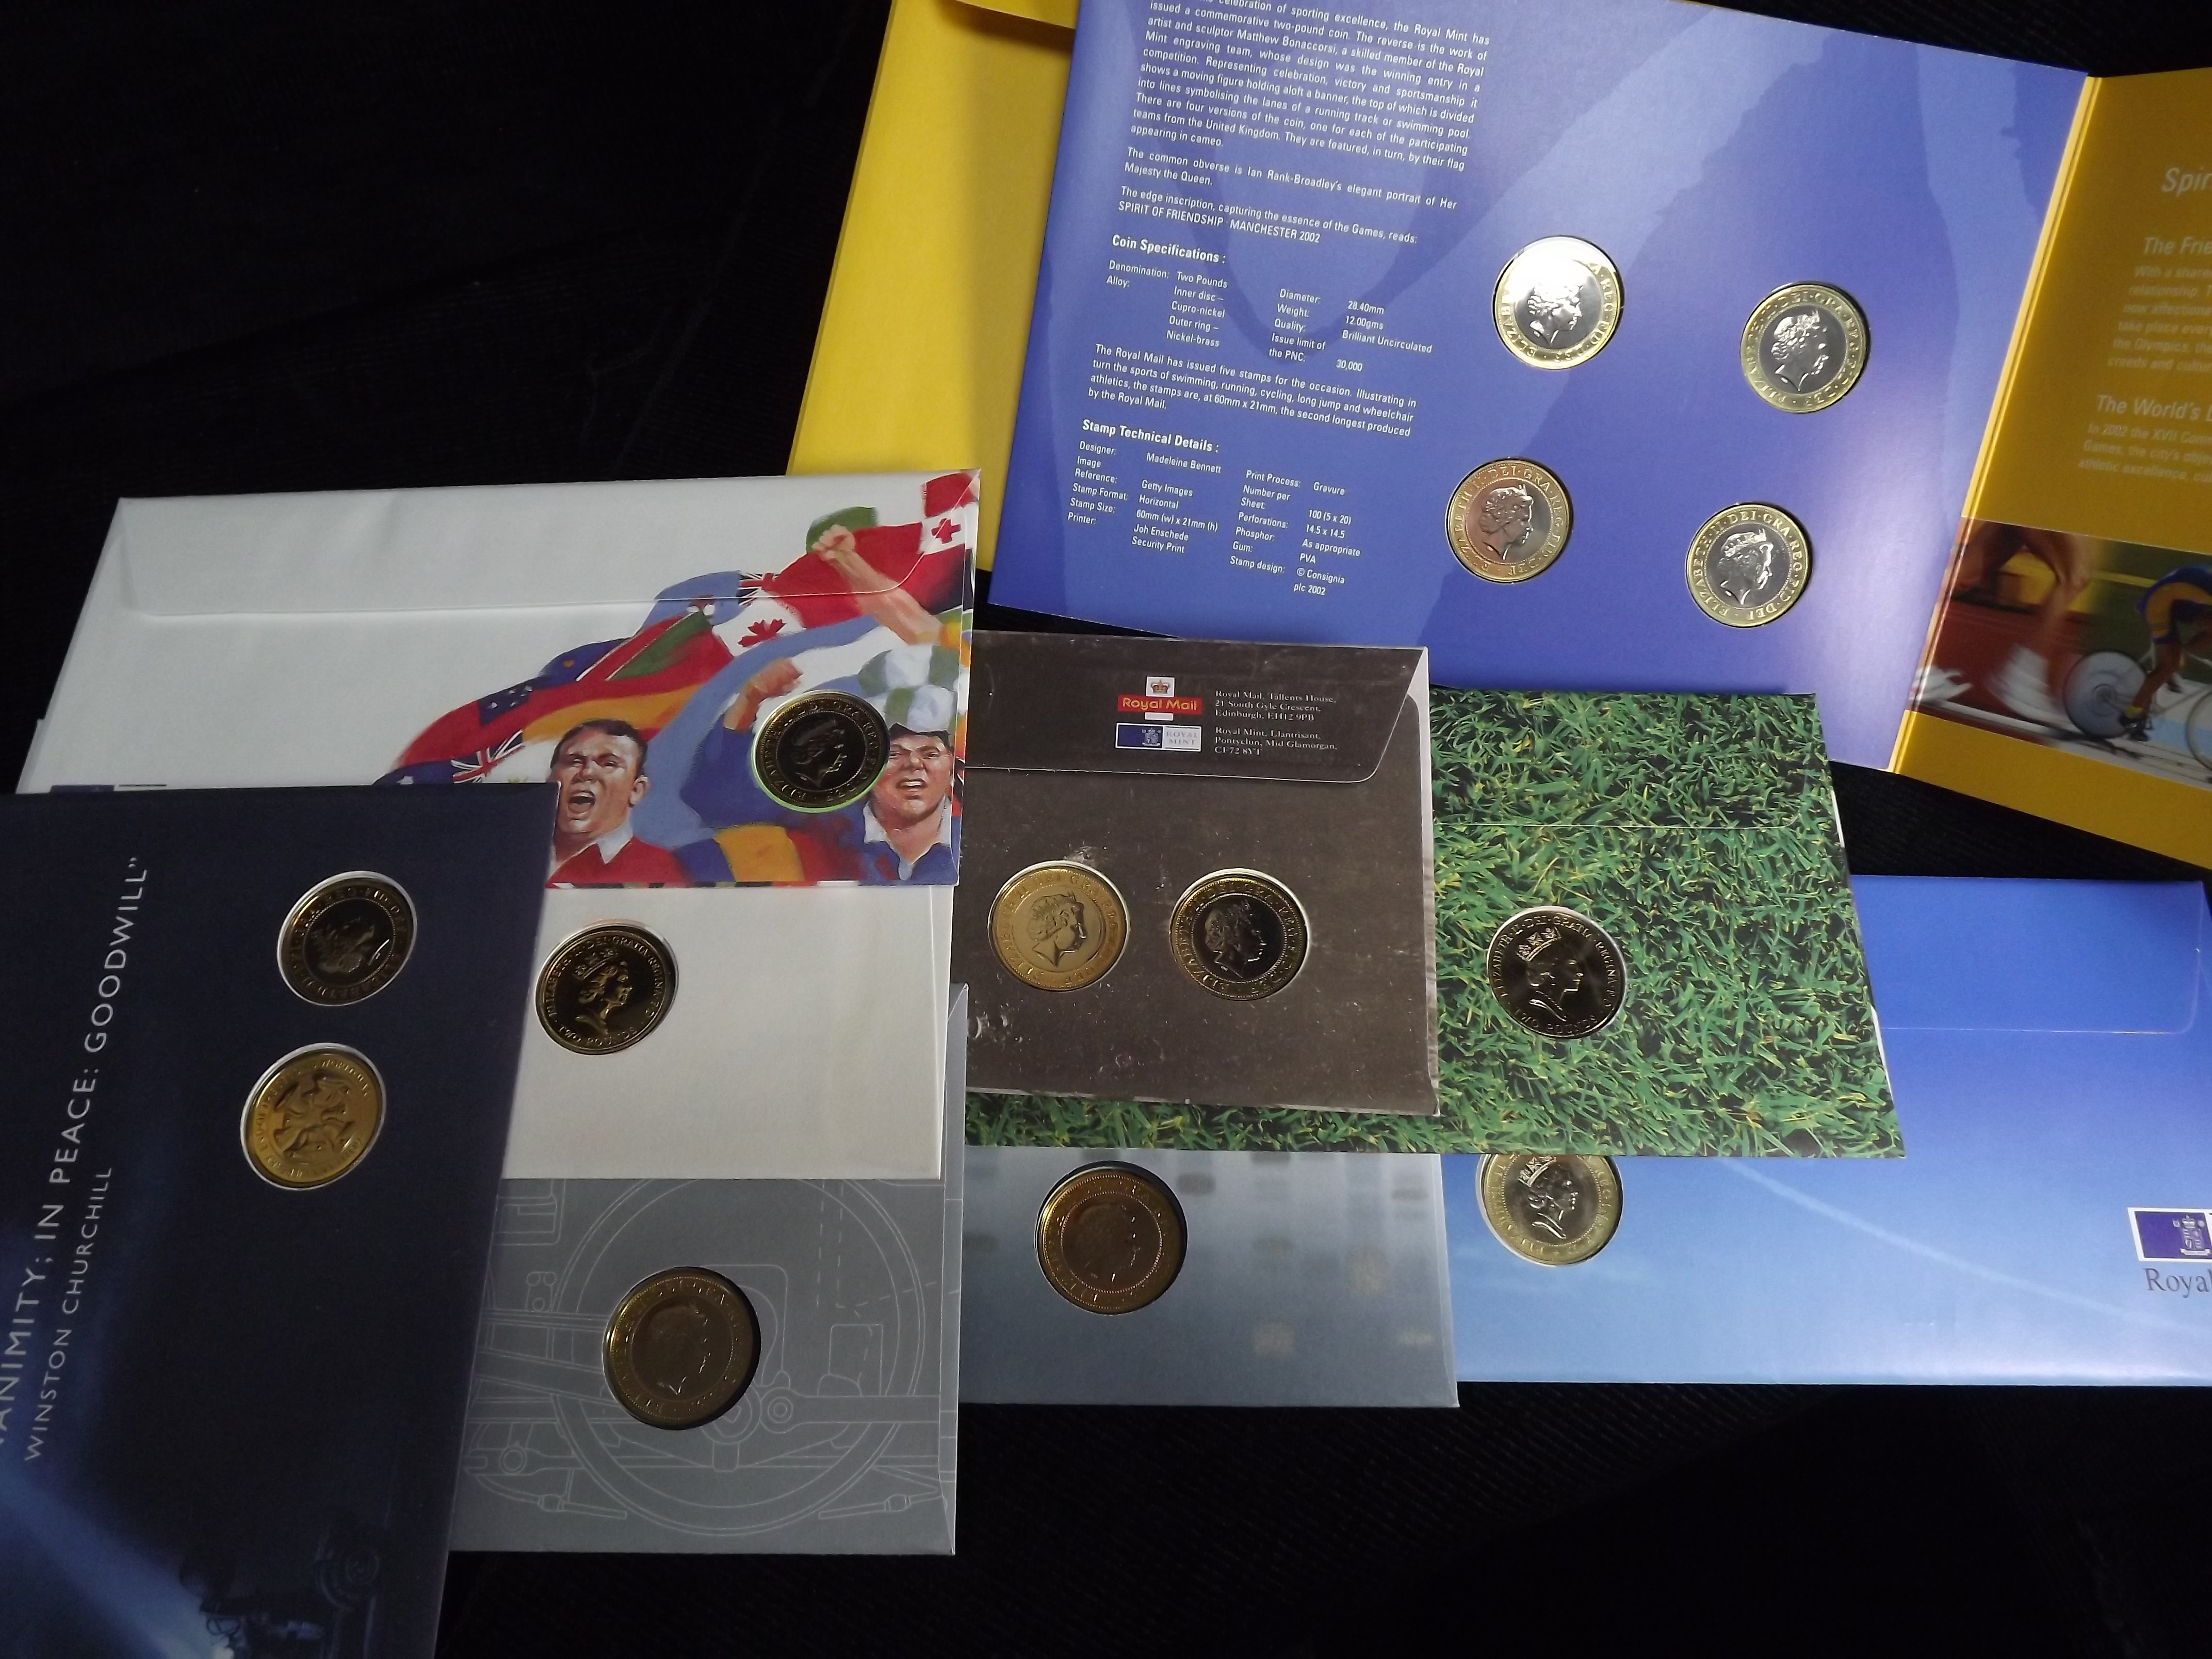 14 x GB Royal Mint Uncirculated £2 Coins Queen Elizabeth II contained in 9 x Royal Mail Stamp - Image 5 of 5